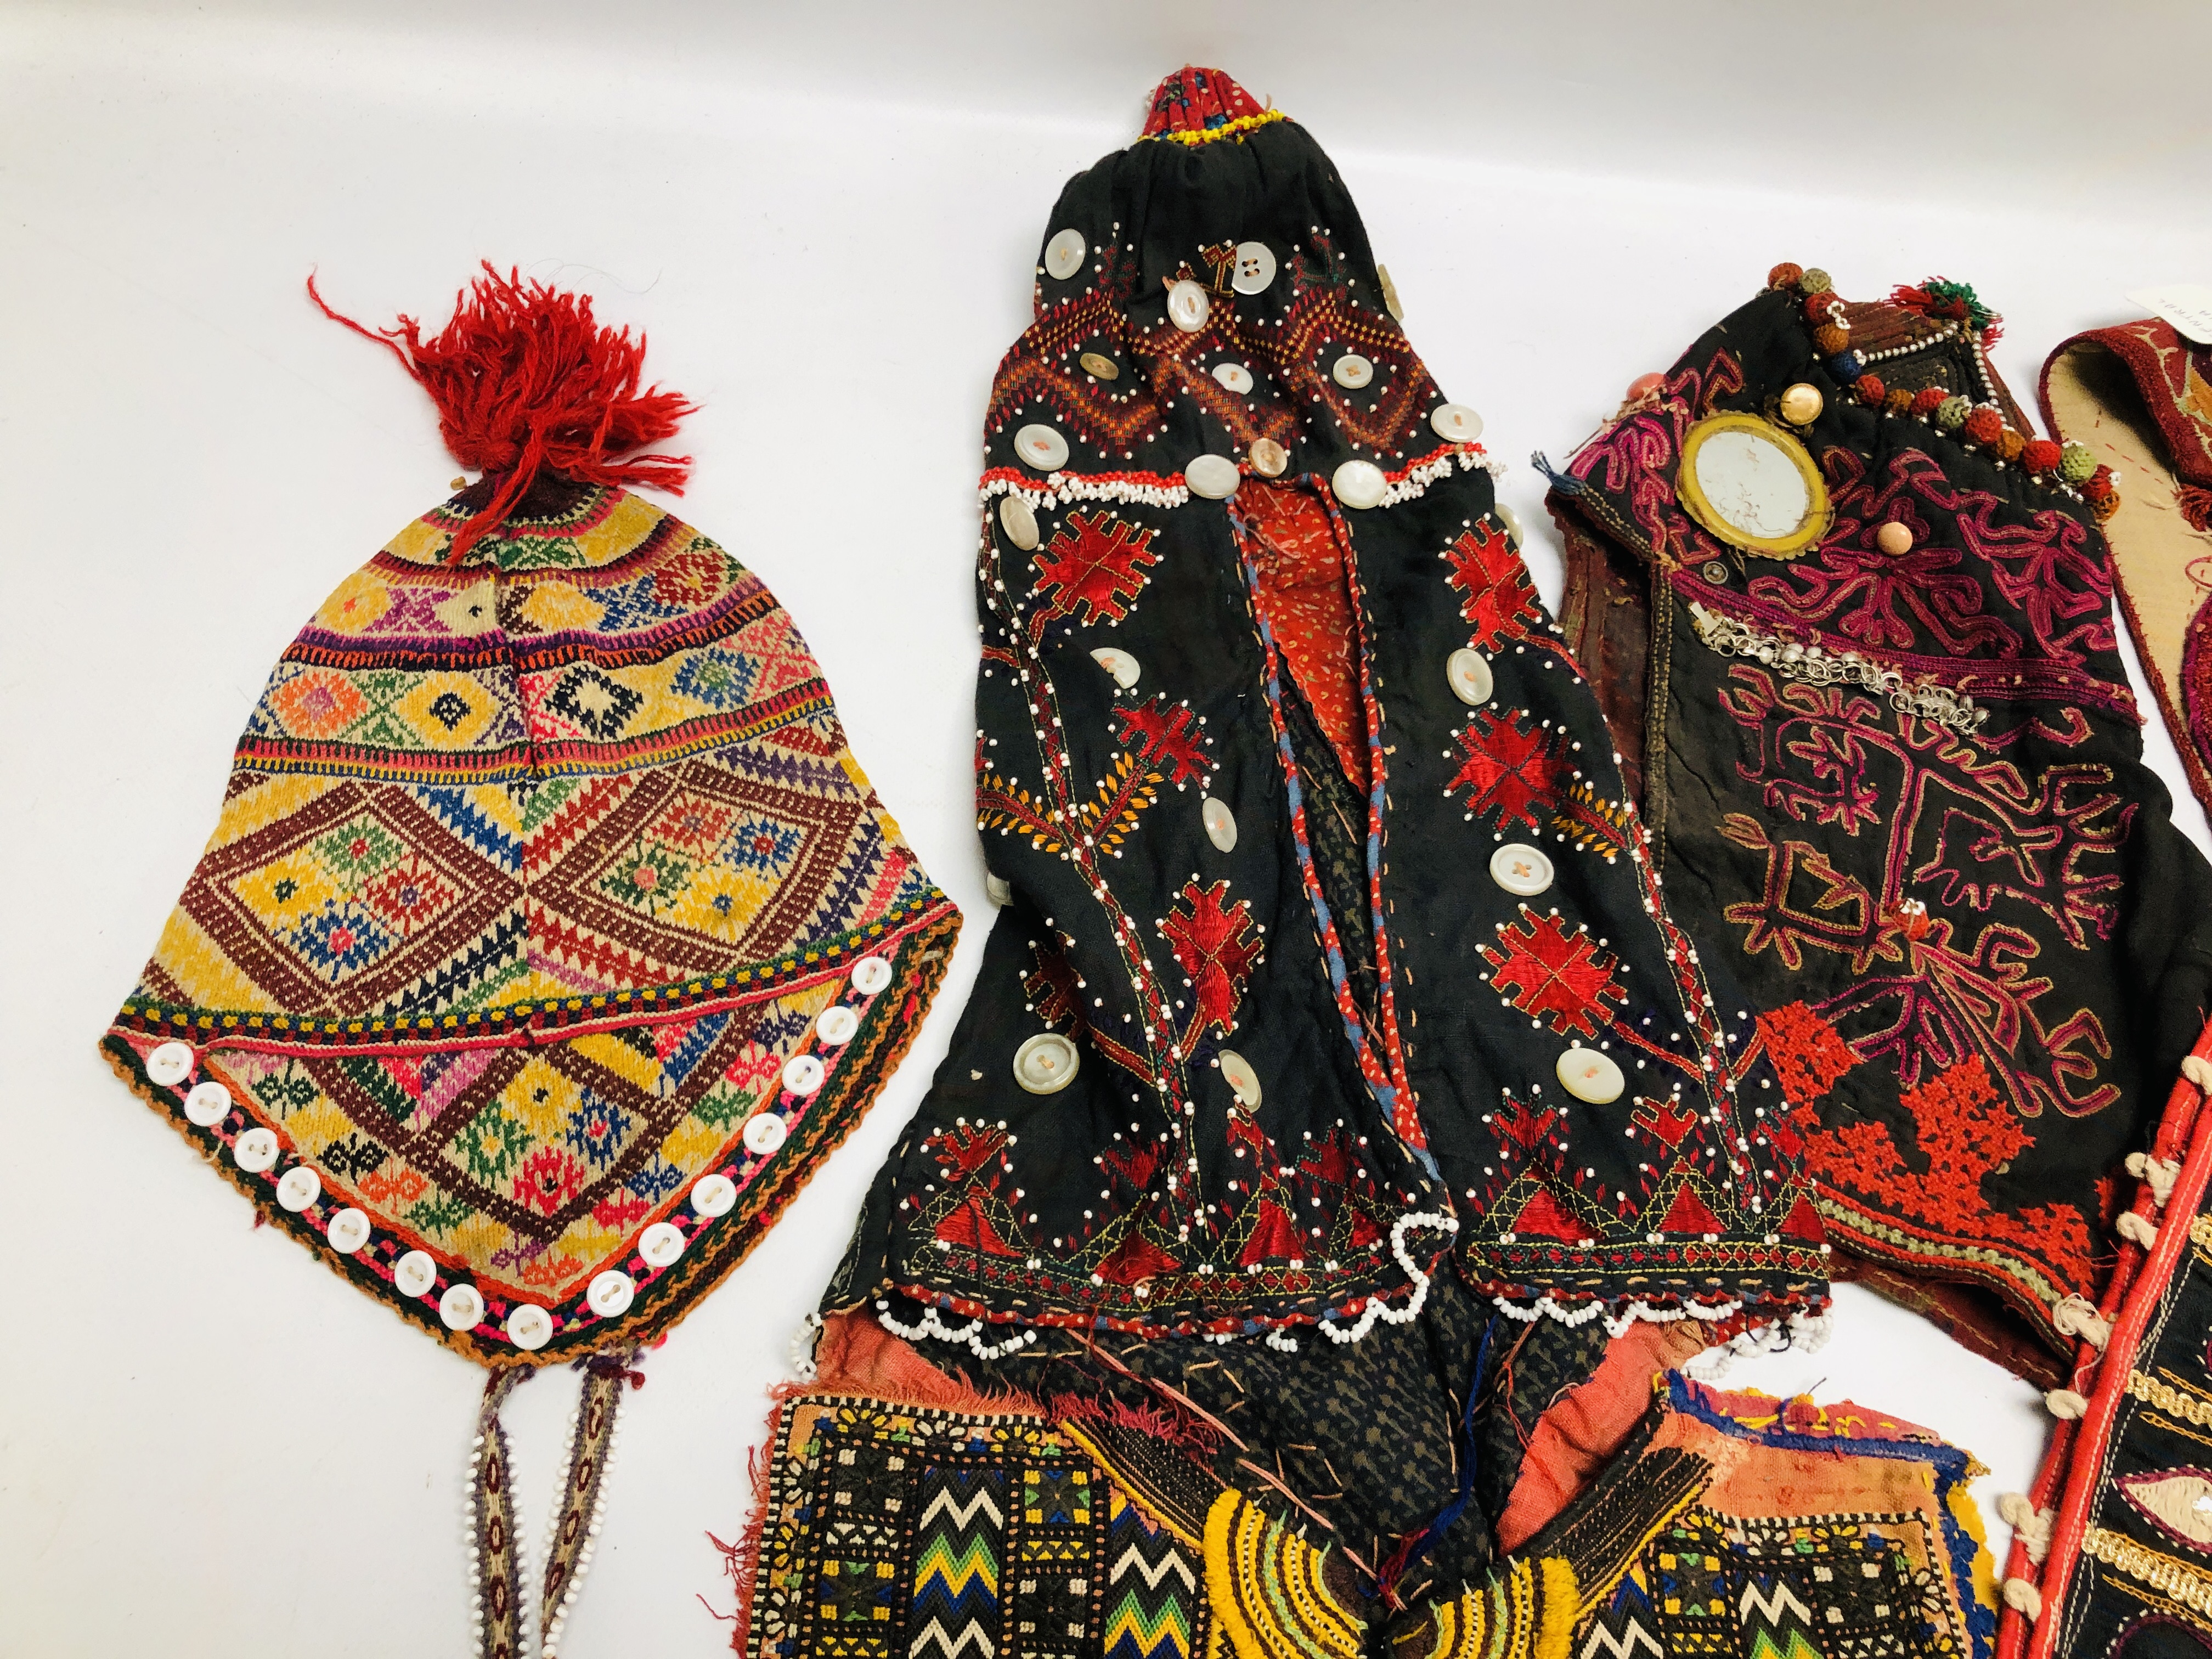 A GROUP OF 5 ETHNIC AND TRIBAL HATS / HEAD COVERINGS TO INCLUDE AN ELABORATELY EMBROIDERED ASIAN - Image 4 of 12